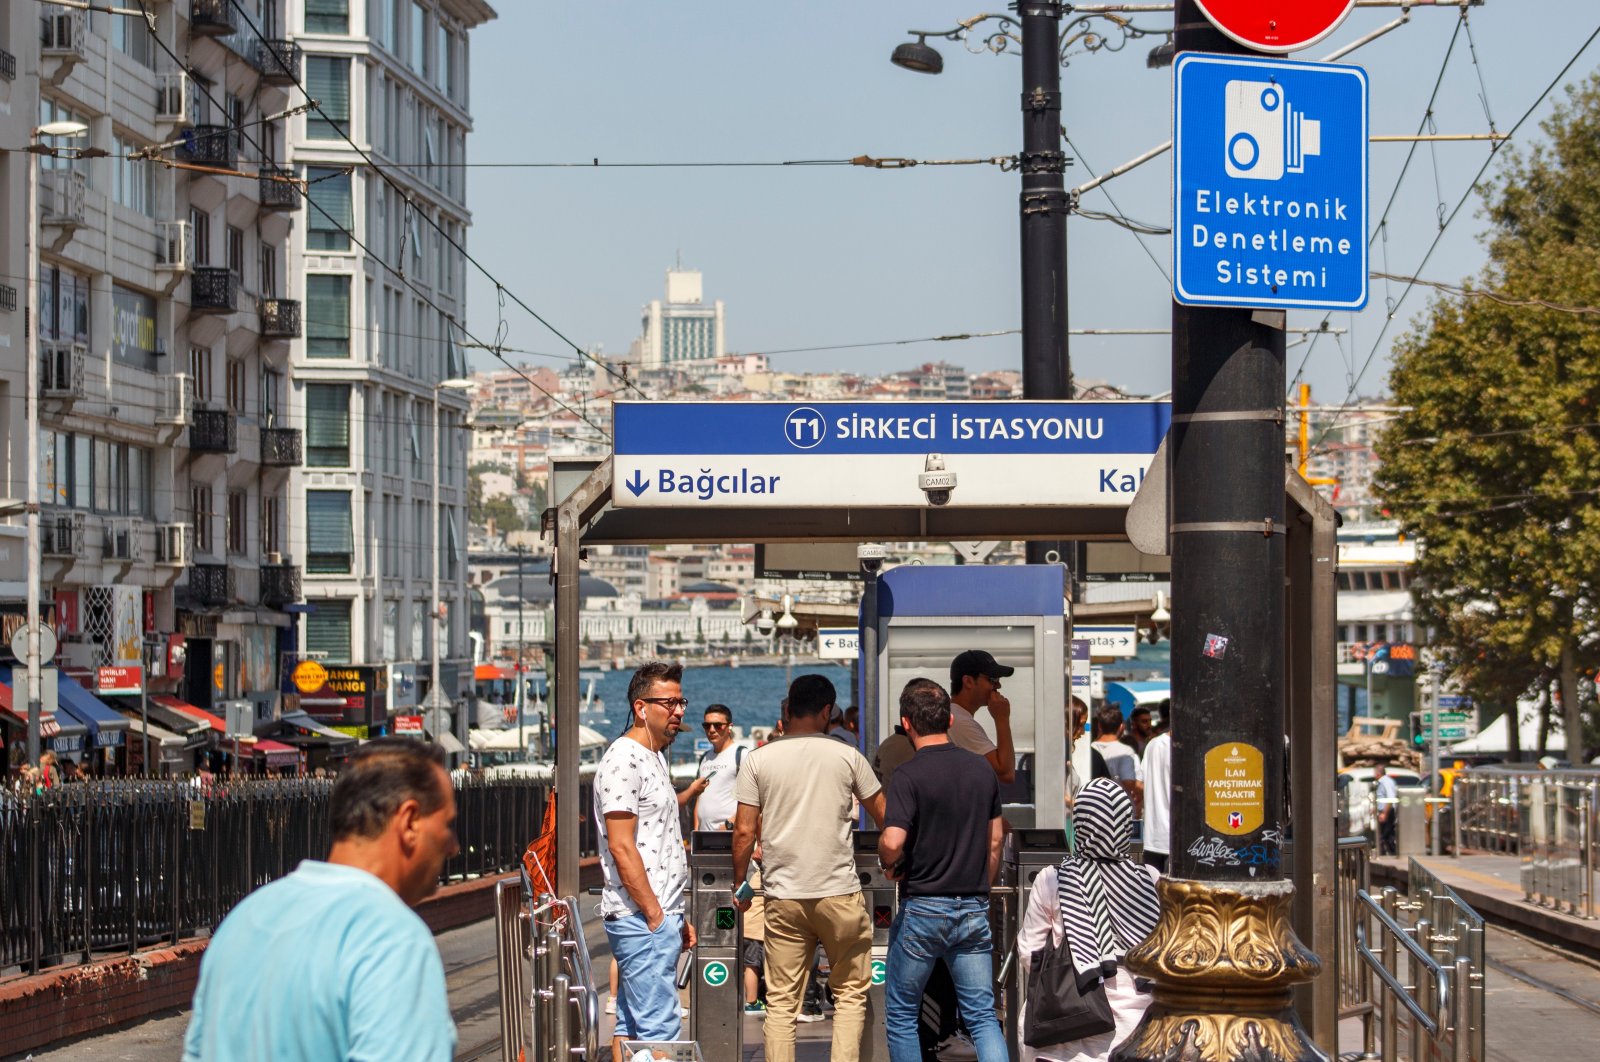 Istanbul’s historical pedestrian crossing opens after years